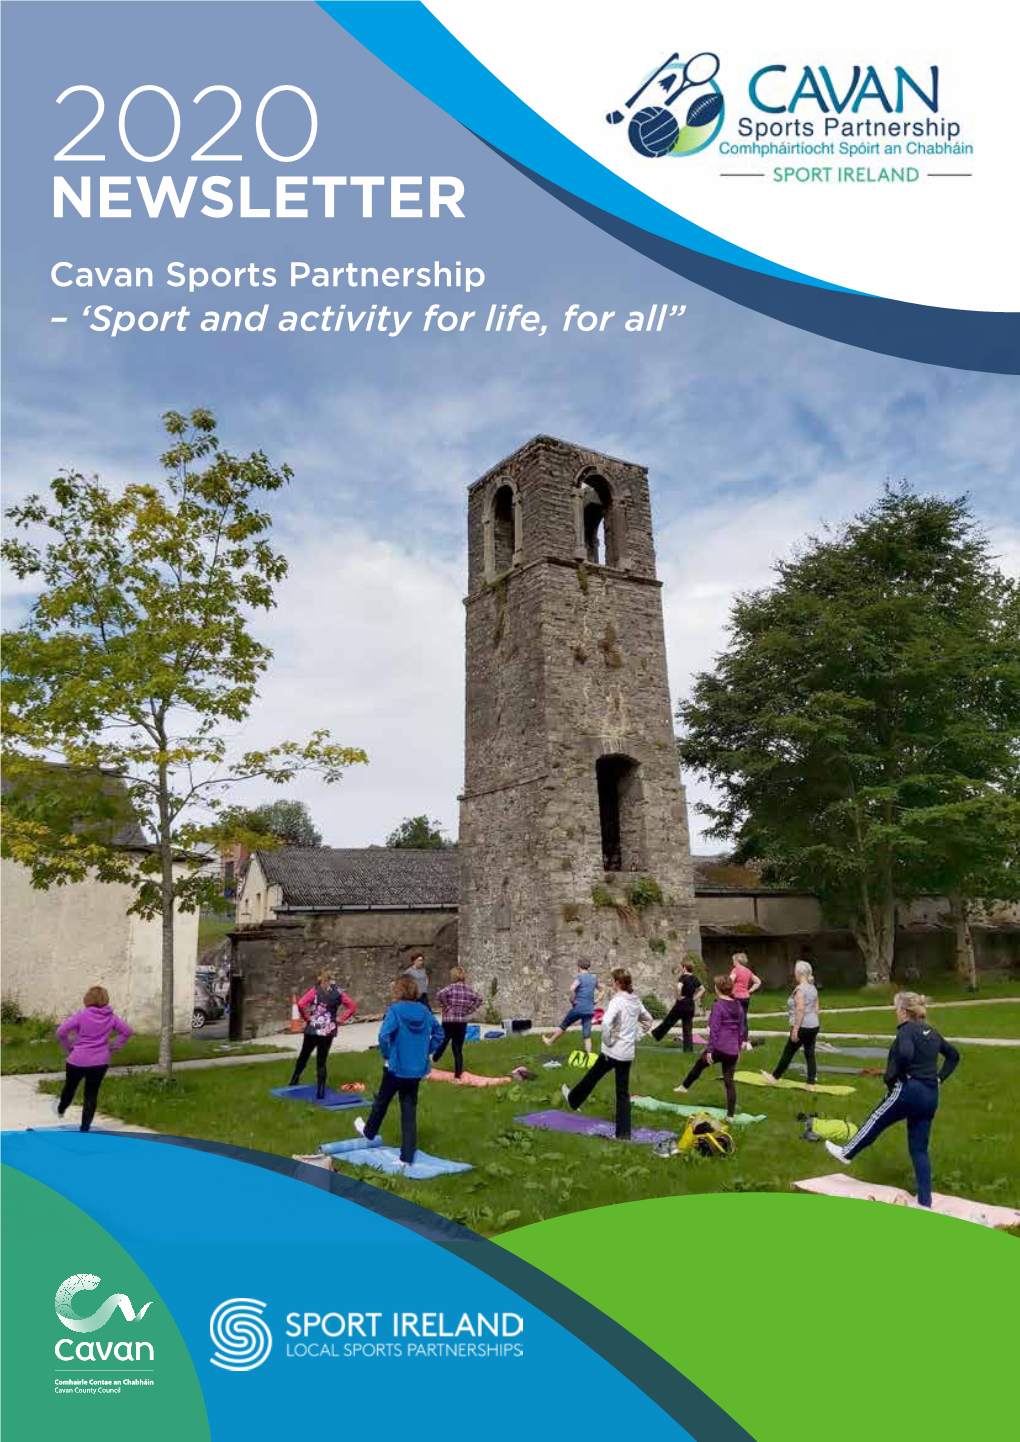 2020 NEWSLETTER Cavan Sports Partnership – ‘Sport and Activity for Life, for All”